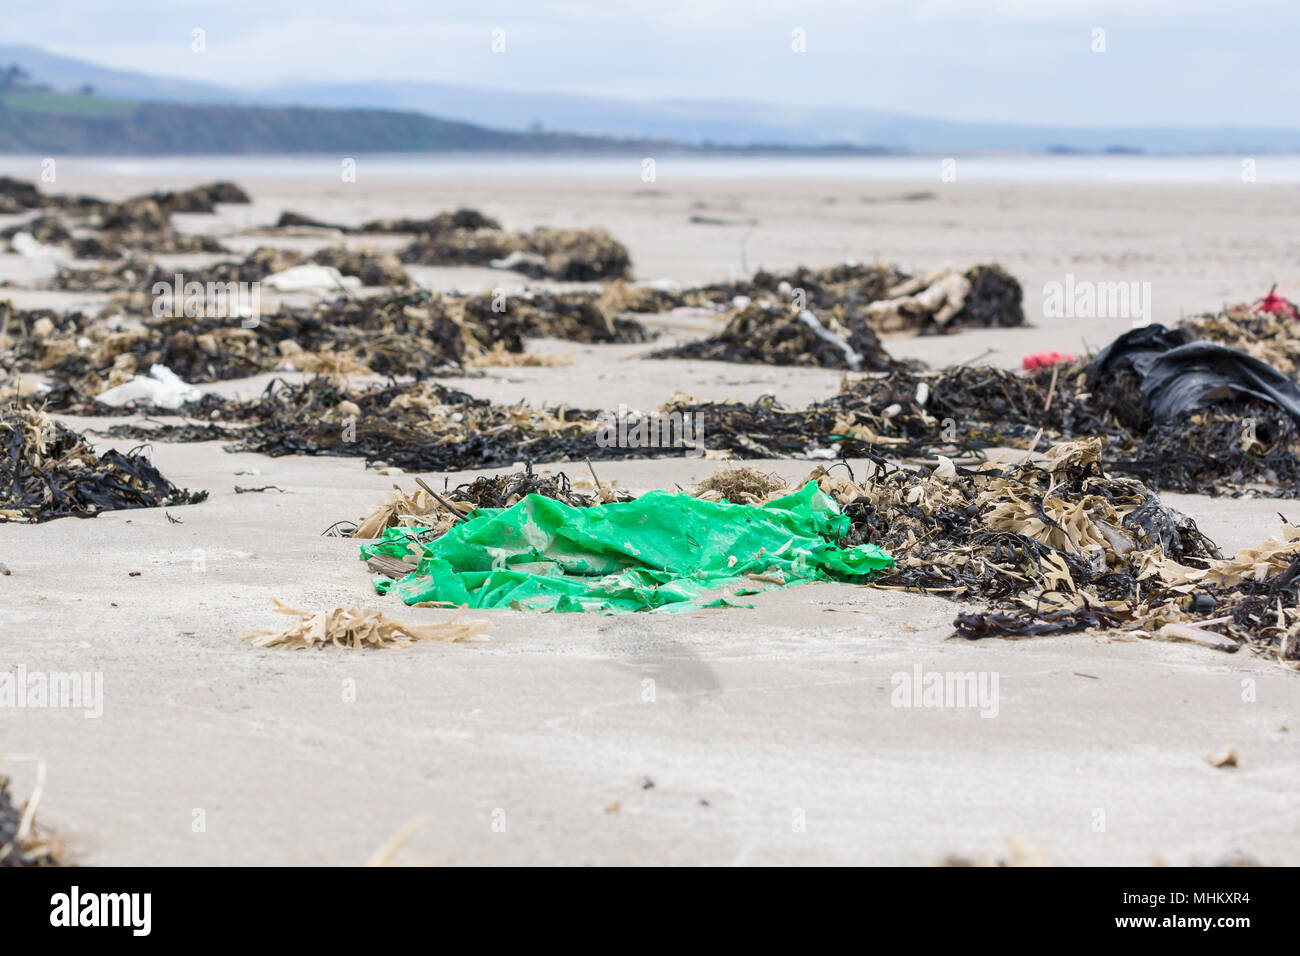 Green plastic sheet washed up on a beach surrounded by seaweed an example plastic pollution in the sea around the UK Stock Photo